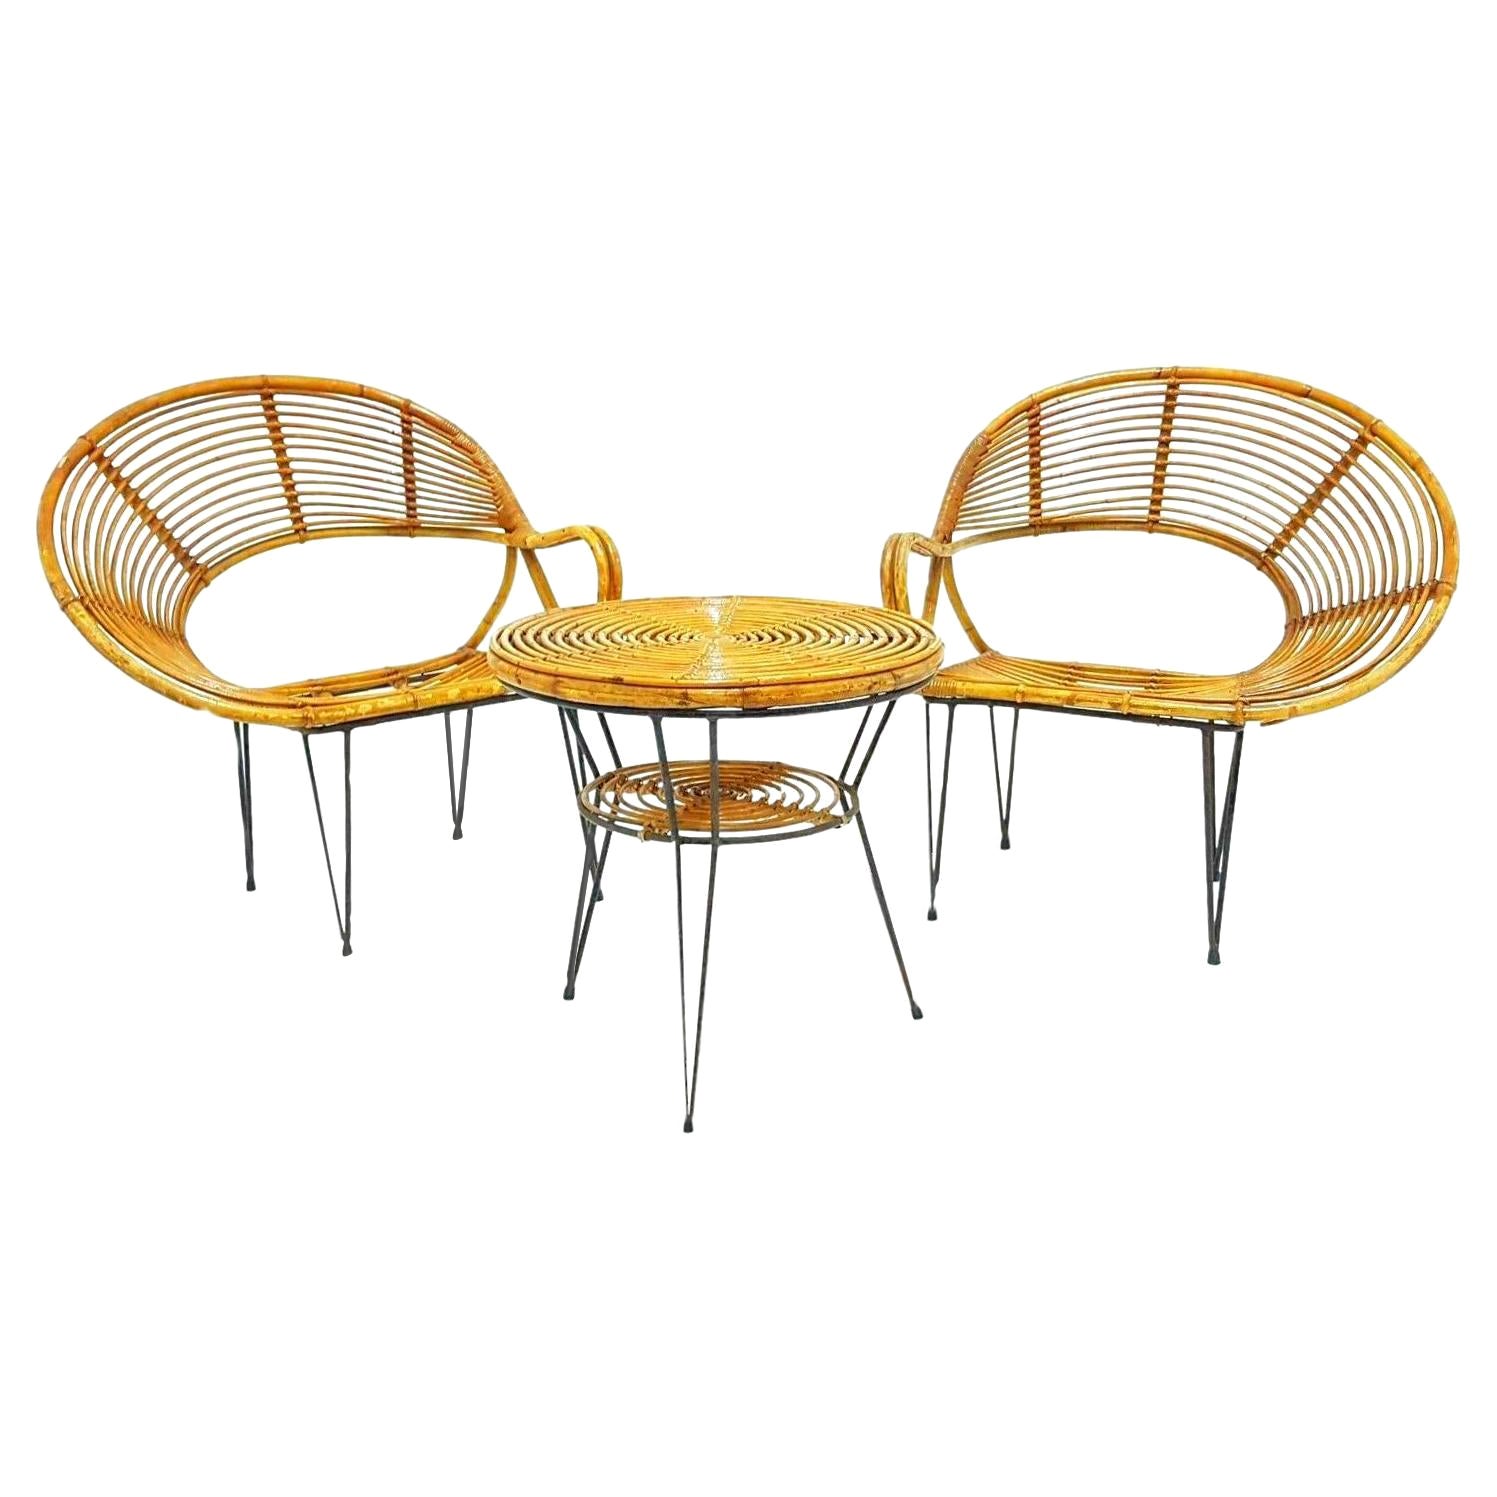 Lounge Chairs and Bamboo Table Design Janine Abraham & Dirk Jan Rol, 1950s